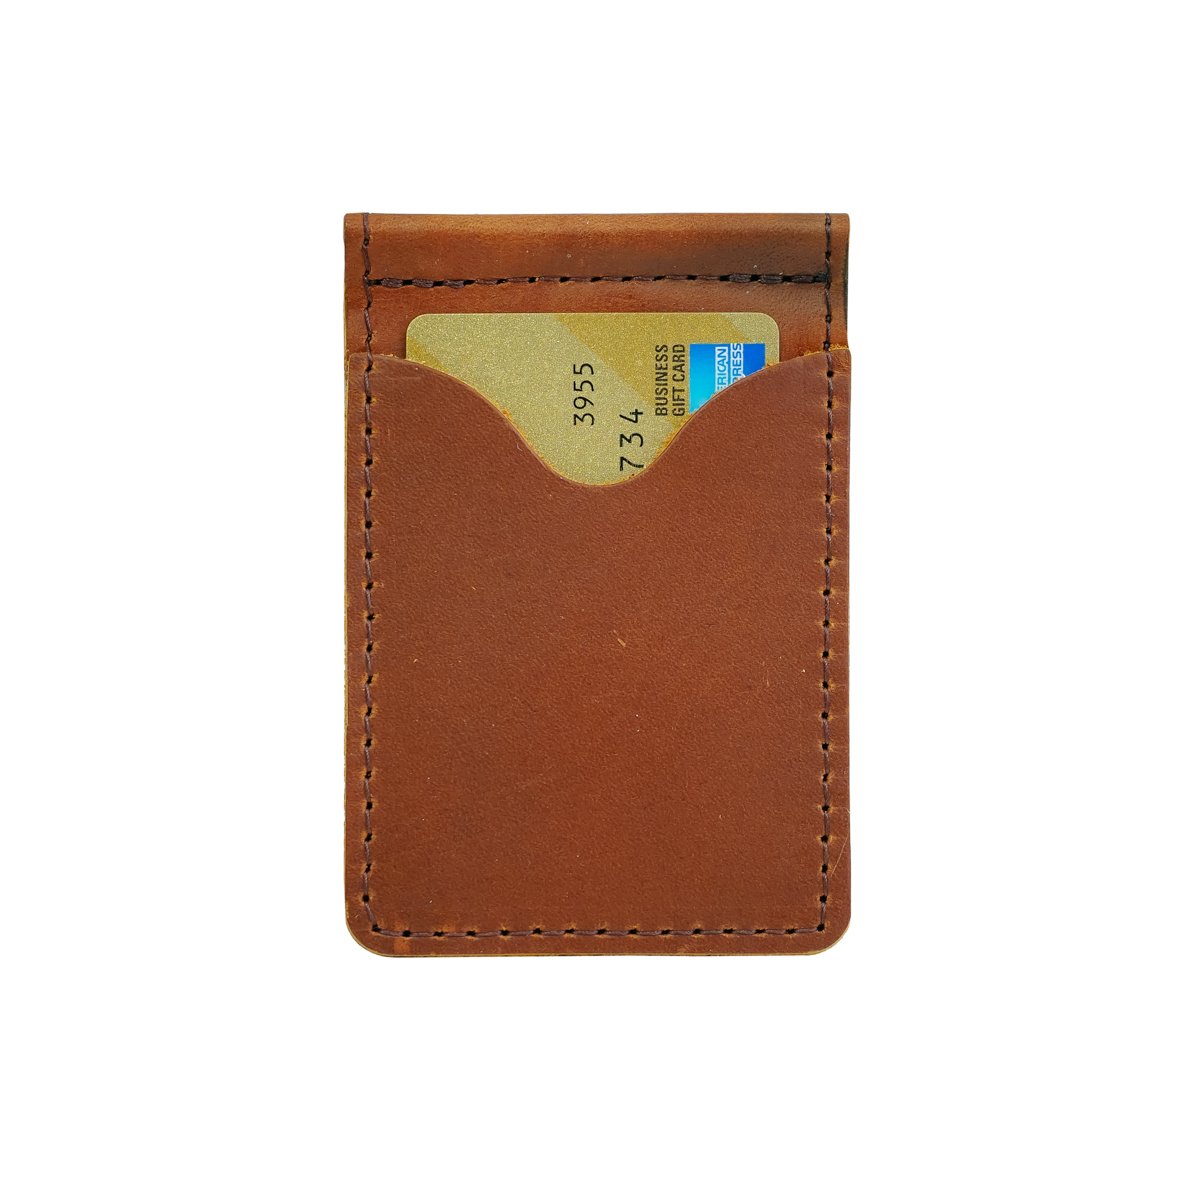 Mission Mercantile Small Leather Moneyclip Wallet